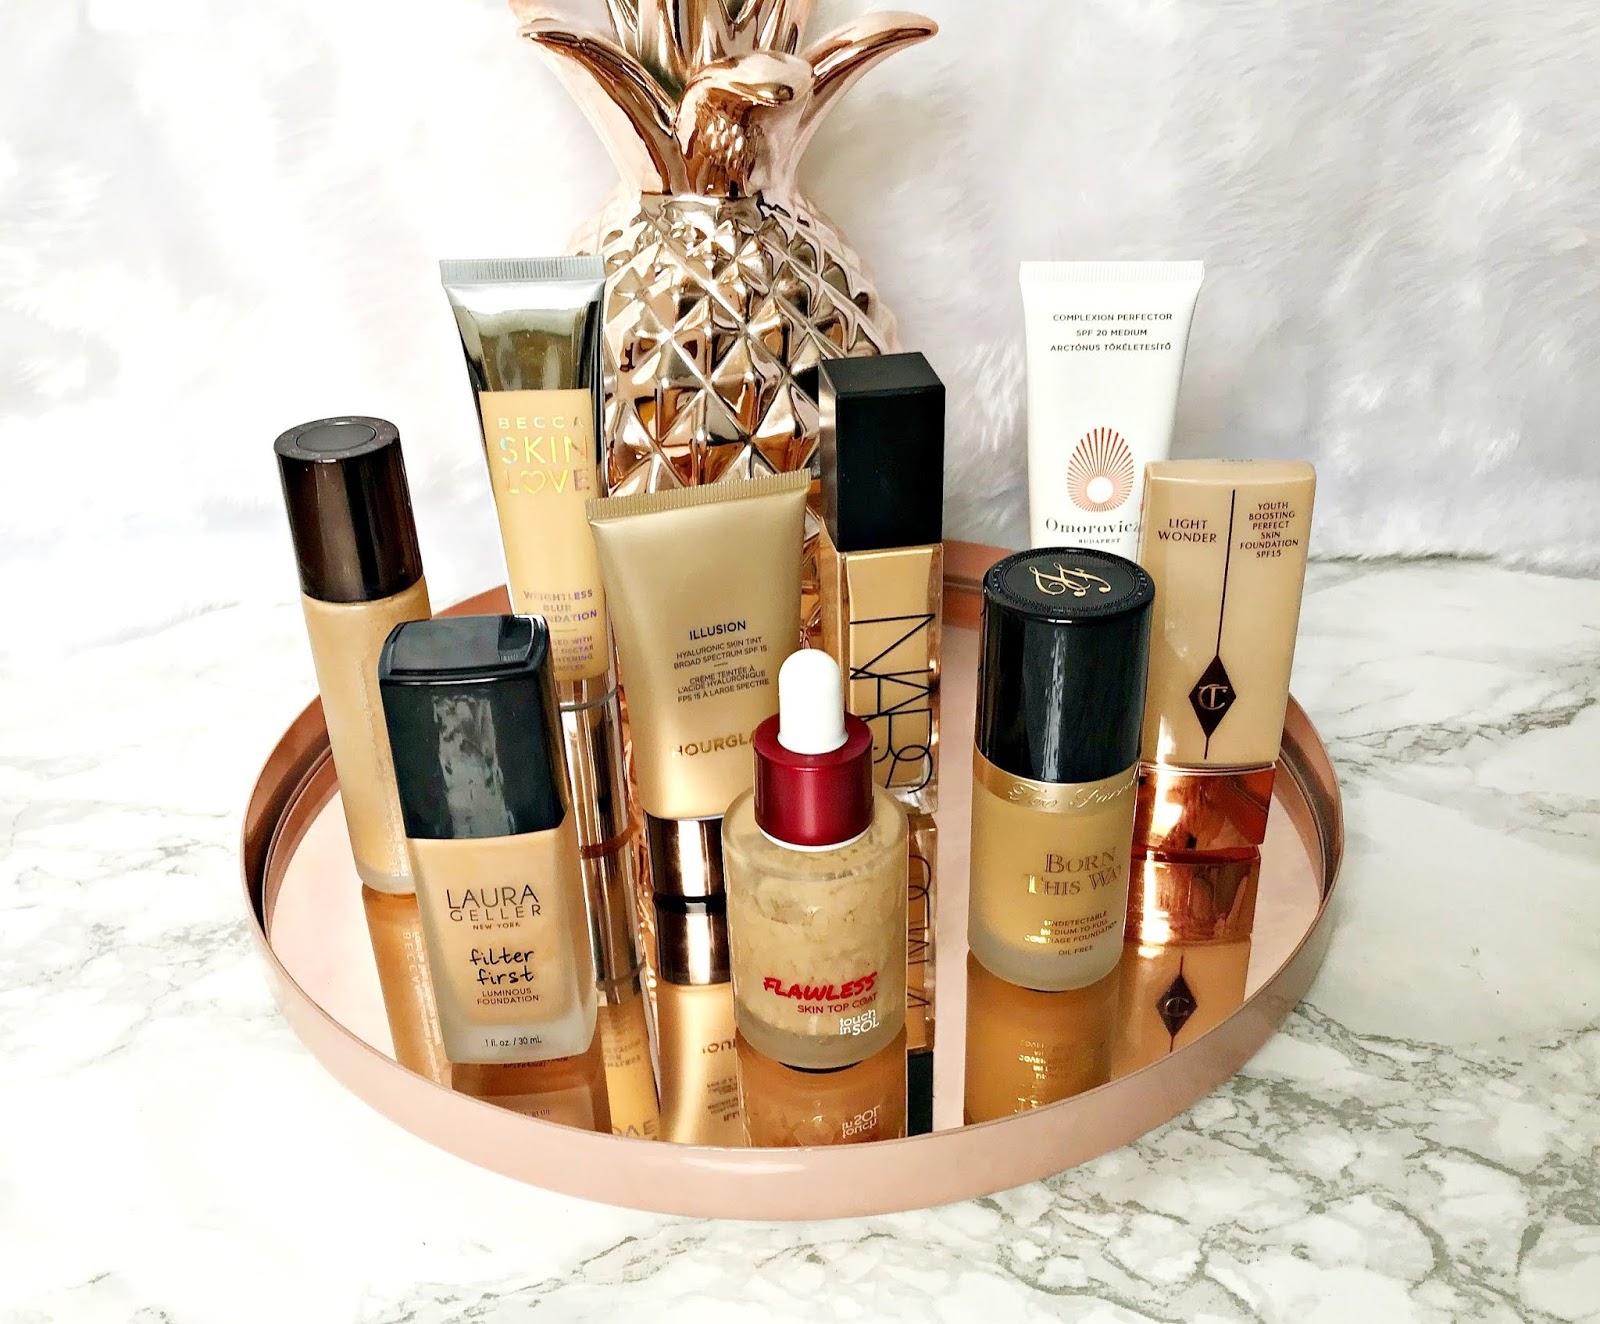 Foundations for dry skin, BECCA, Becca Aqua Luminous Perfecting Foundation, Becca Love Glow, Charlotte Tilbury Light Wonder, Dry Skin, foundation, Hourglass Illusion Hyaluronic Skin Tint, Too Faced Born This Way, Touch In Sol Top Coat, 